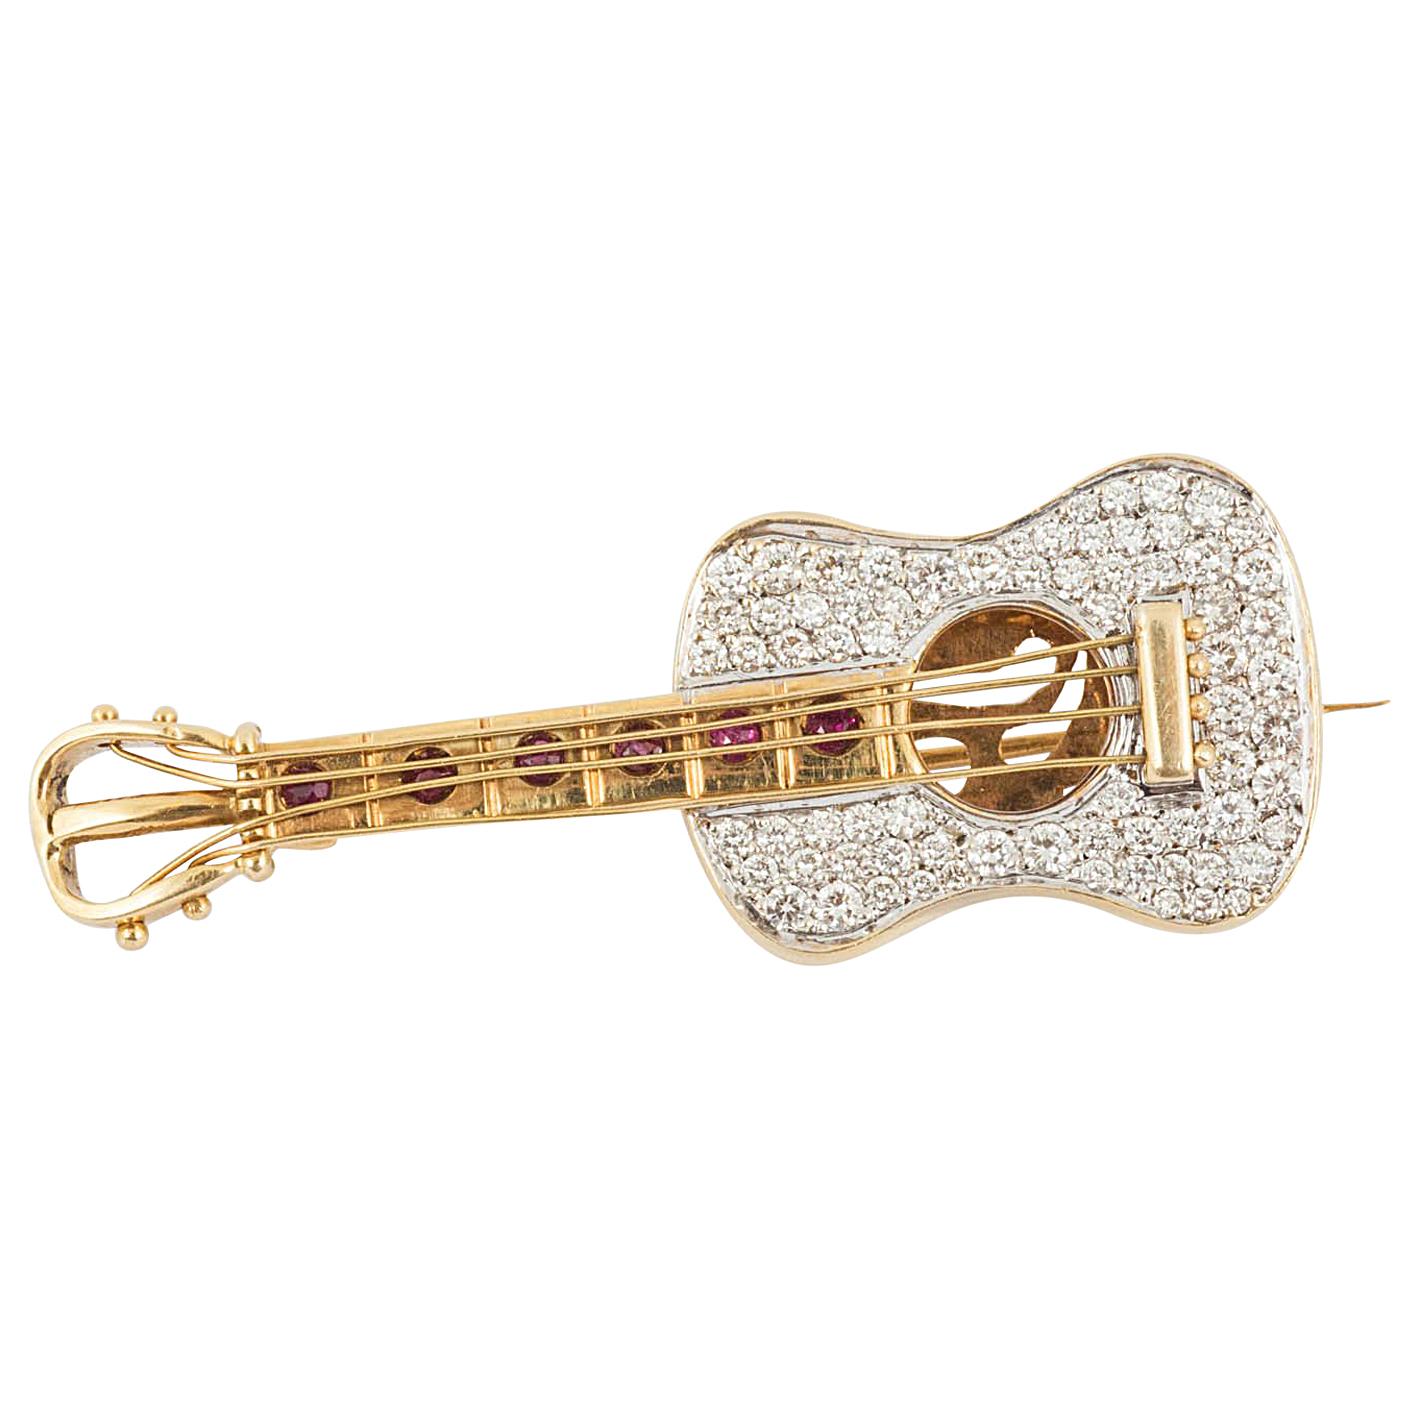 18 Carat Gold or Diamond Guitar Brooch or Pendant For Sale